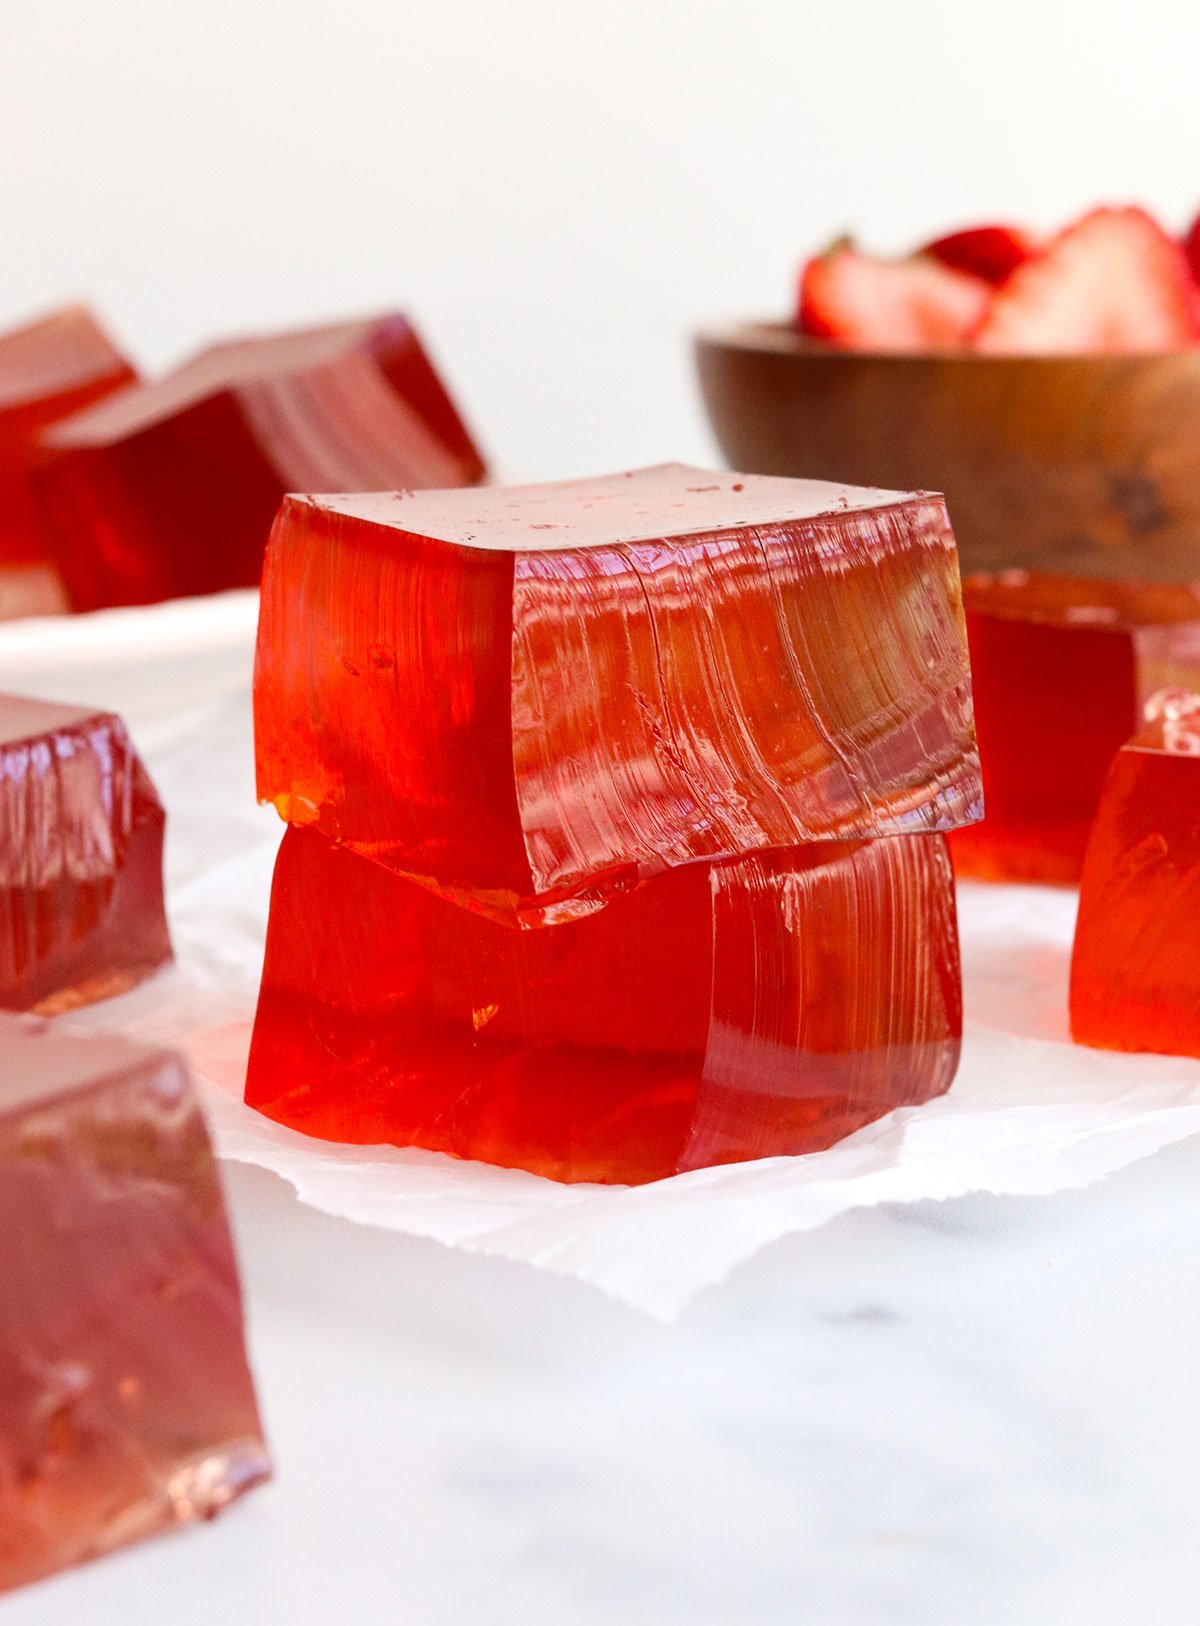 homemade jello squares stacked on parchment paper.